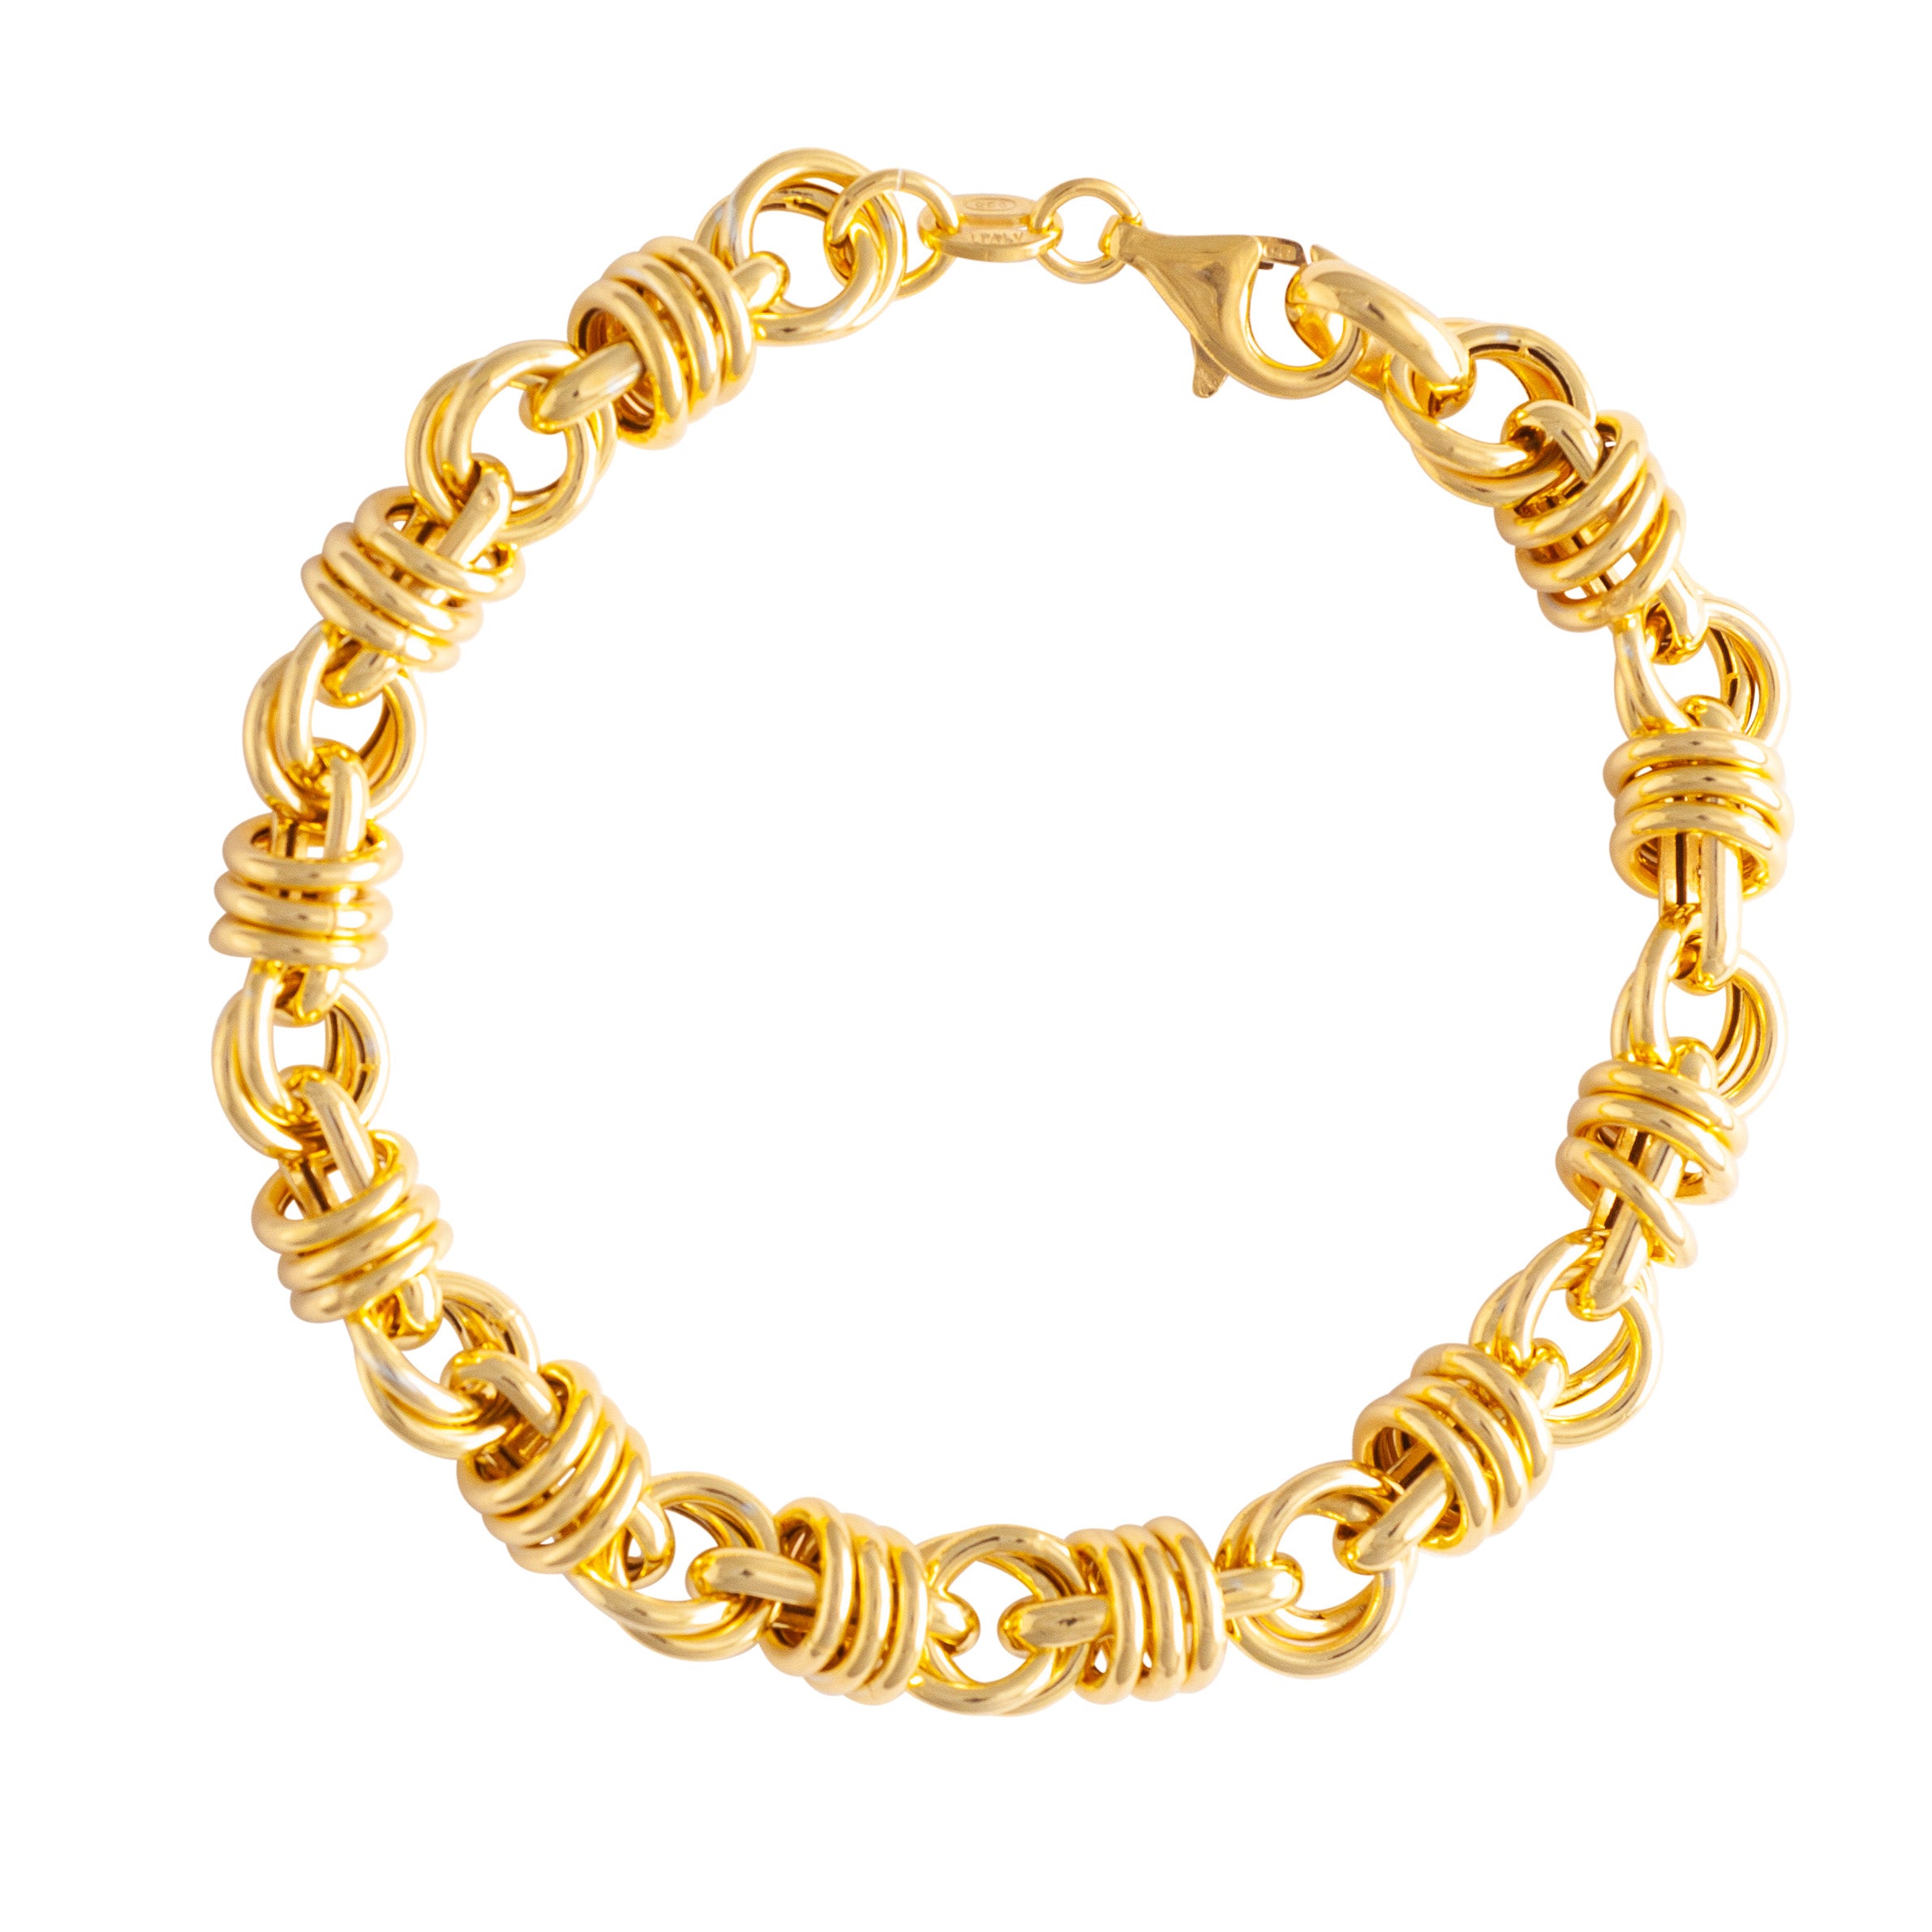 GOLD TWISTED CHAIN BRACELET